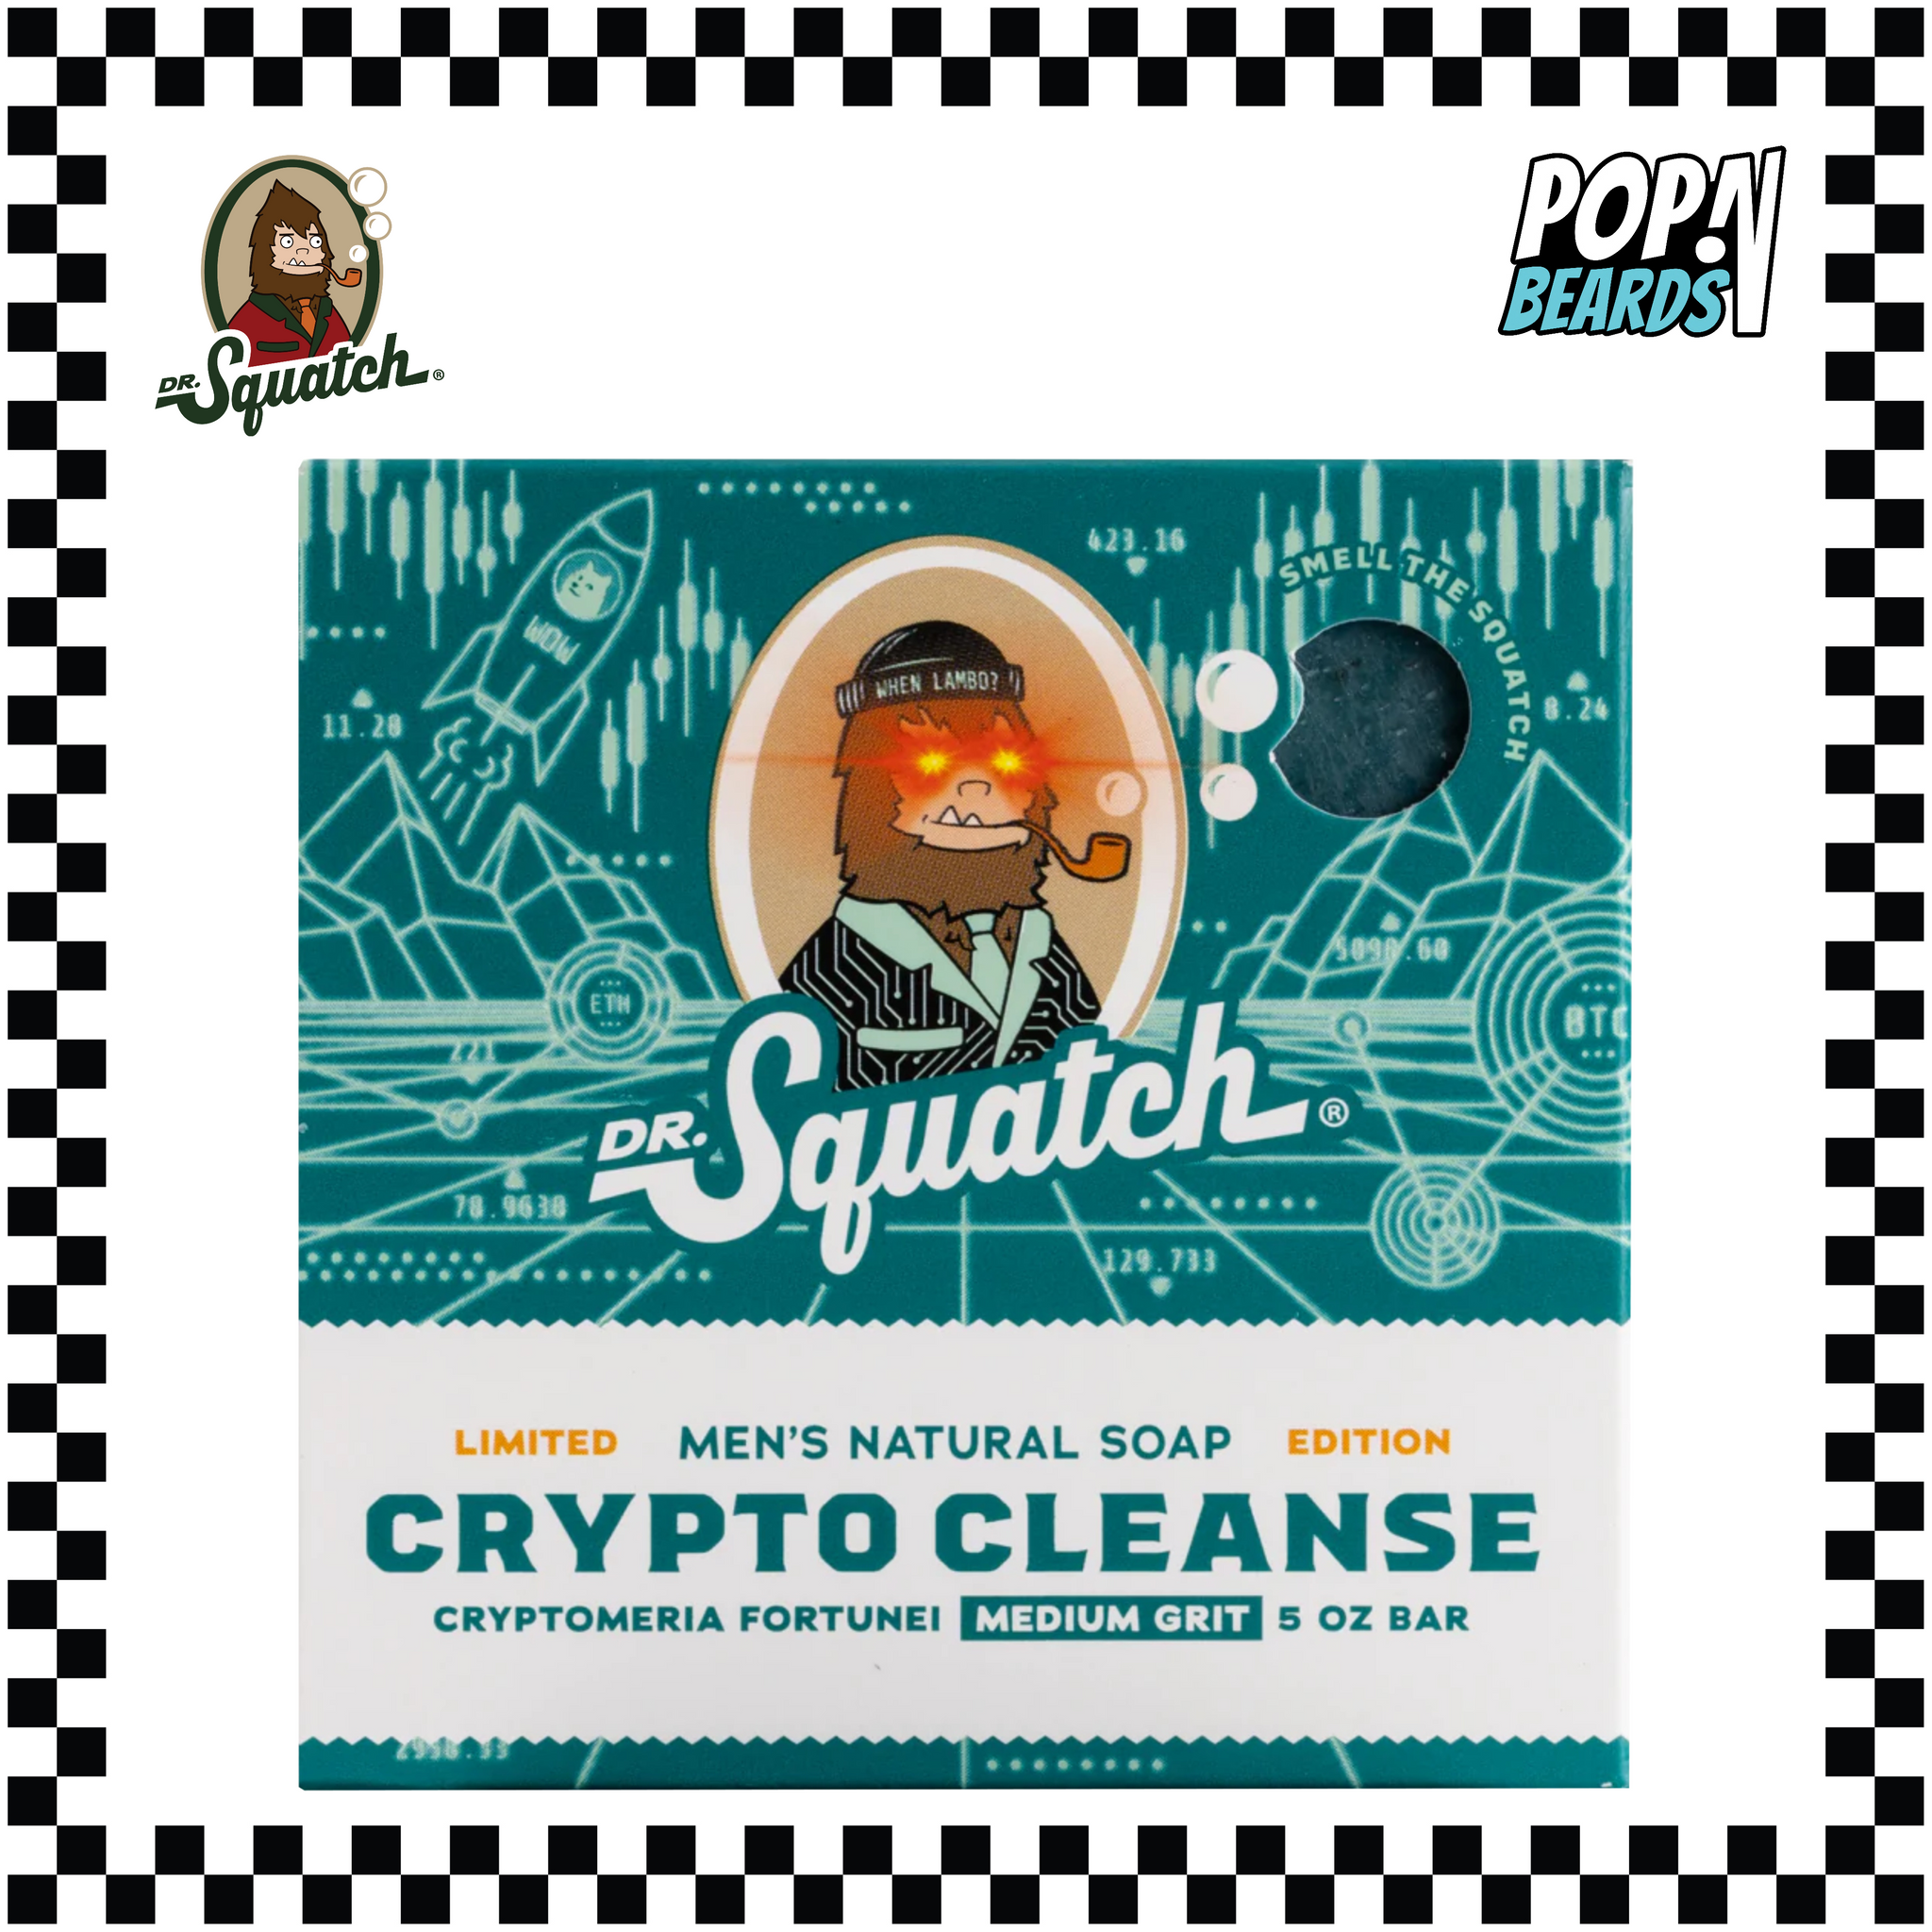 Dr. Squatch Crypto Cleanse Natural Soap 5 oz Bar Limited Edition